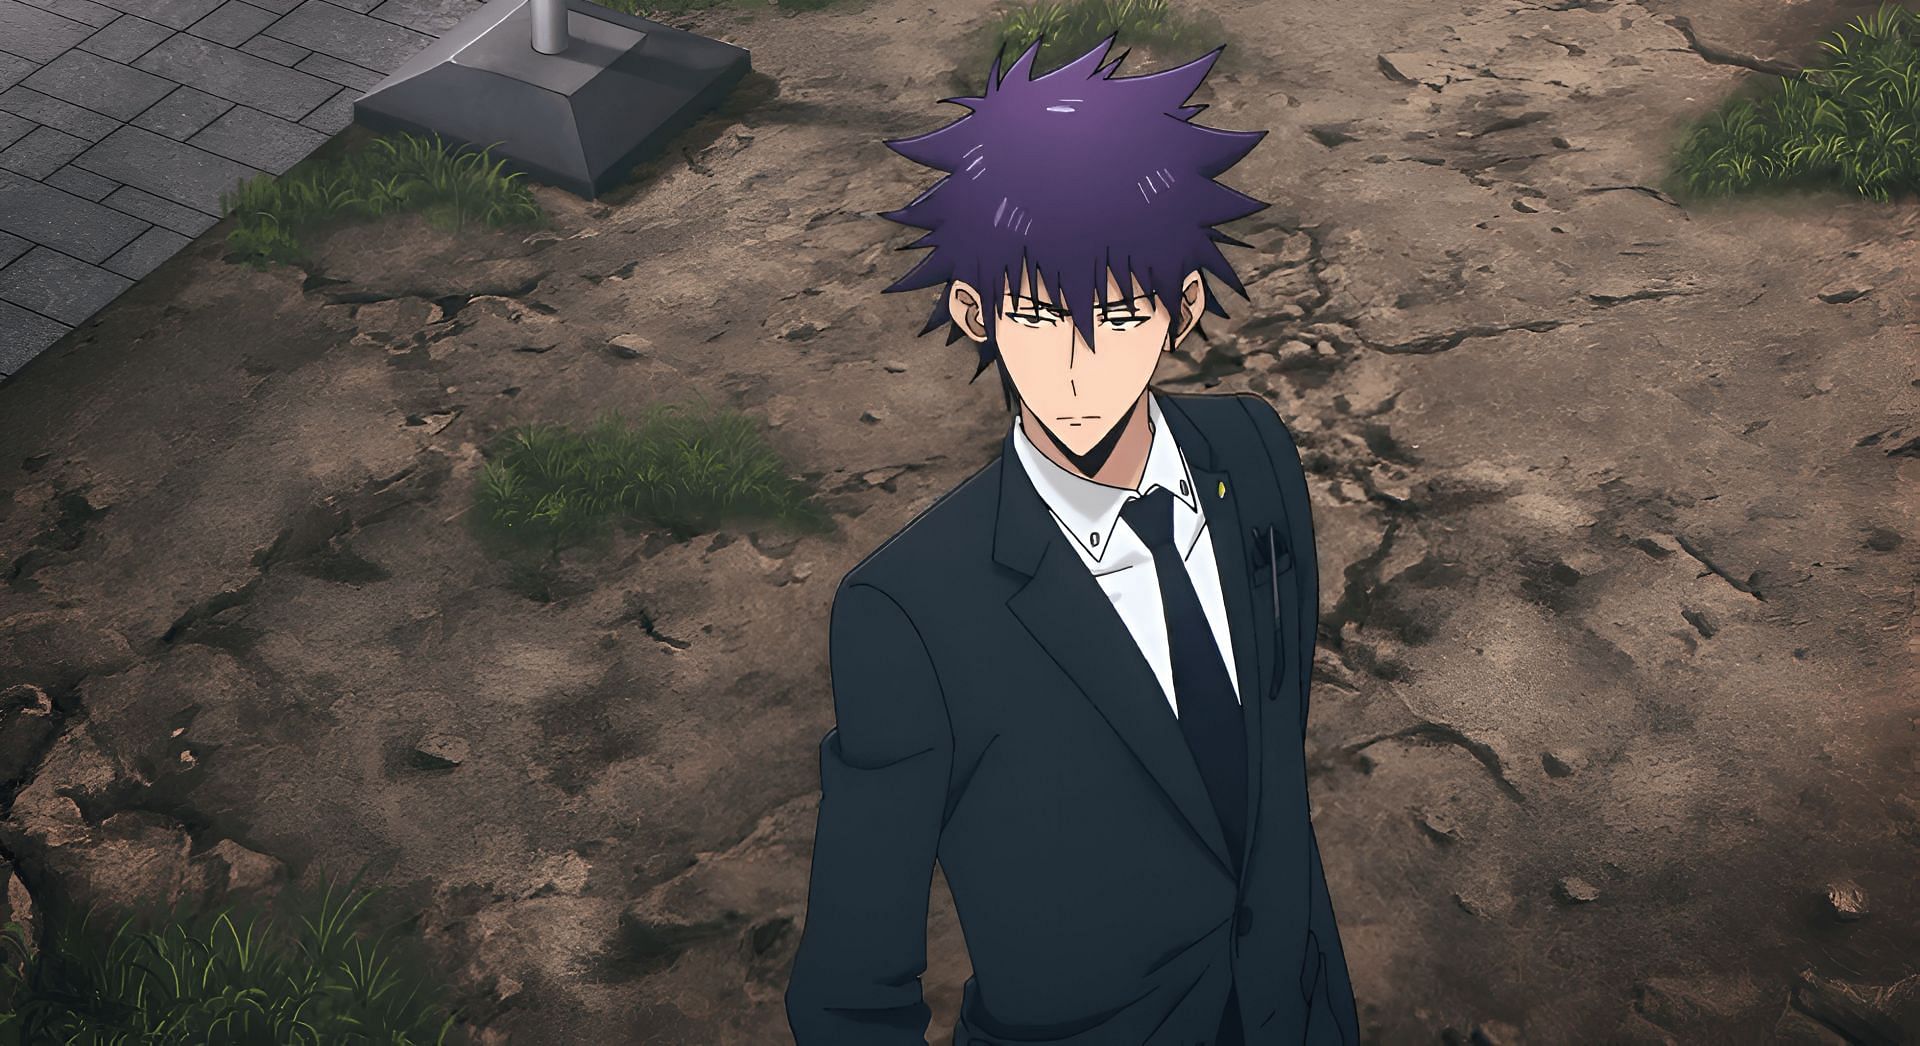 Taeshik as seen in the anime (Image via A-1 Pictures)